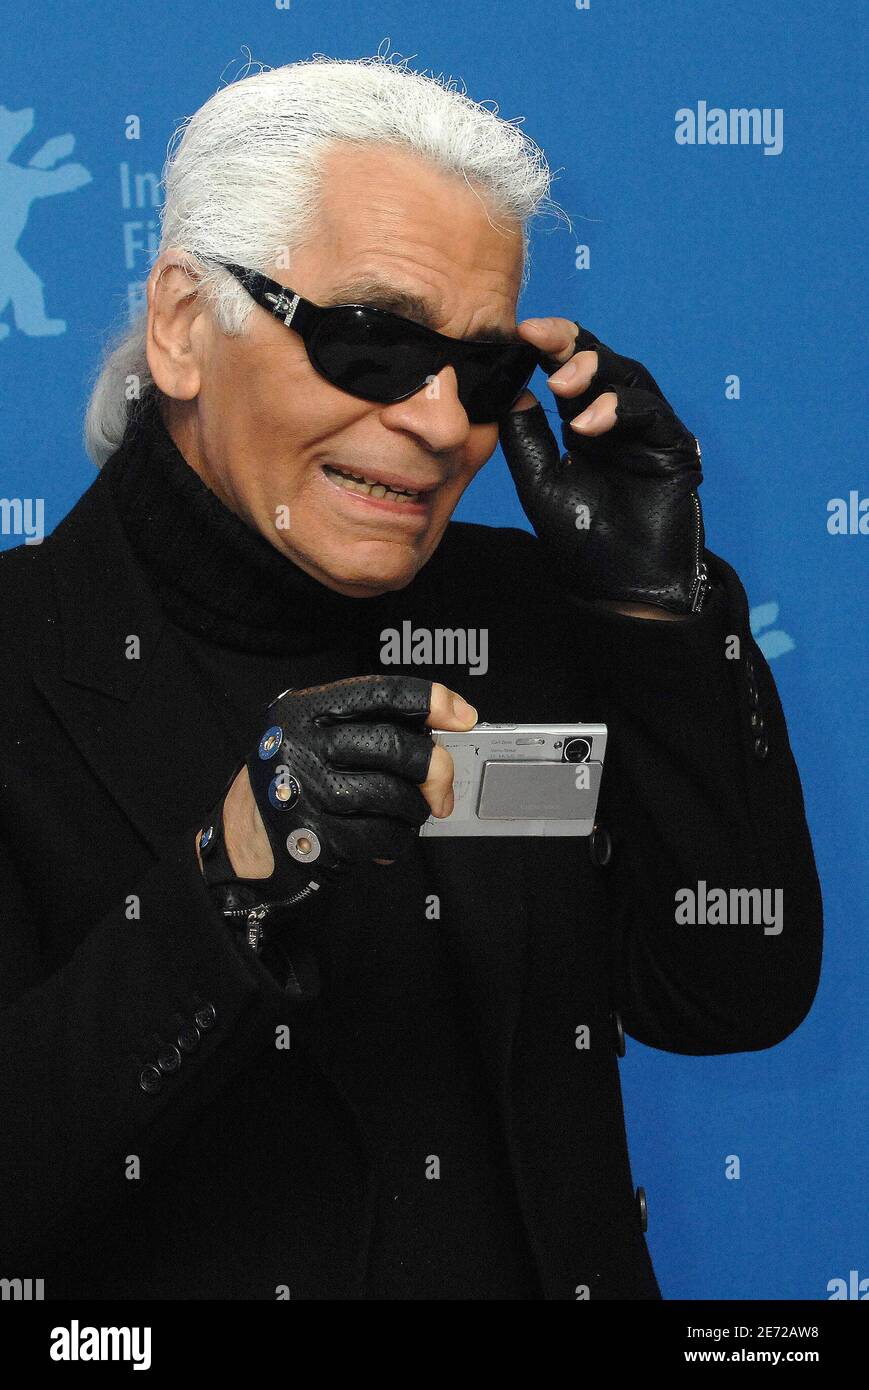 German Designer, Photographer and Director Karl Lagerfeld poses for  photographers and takes pictures of them during a photo-call for the movie 'Lagerfeld  Confidential' at the 57th International Film Festival Berlinale in Berlin,